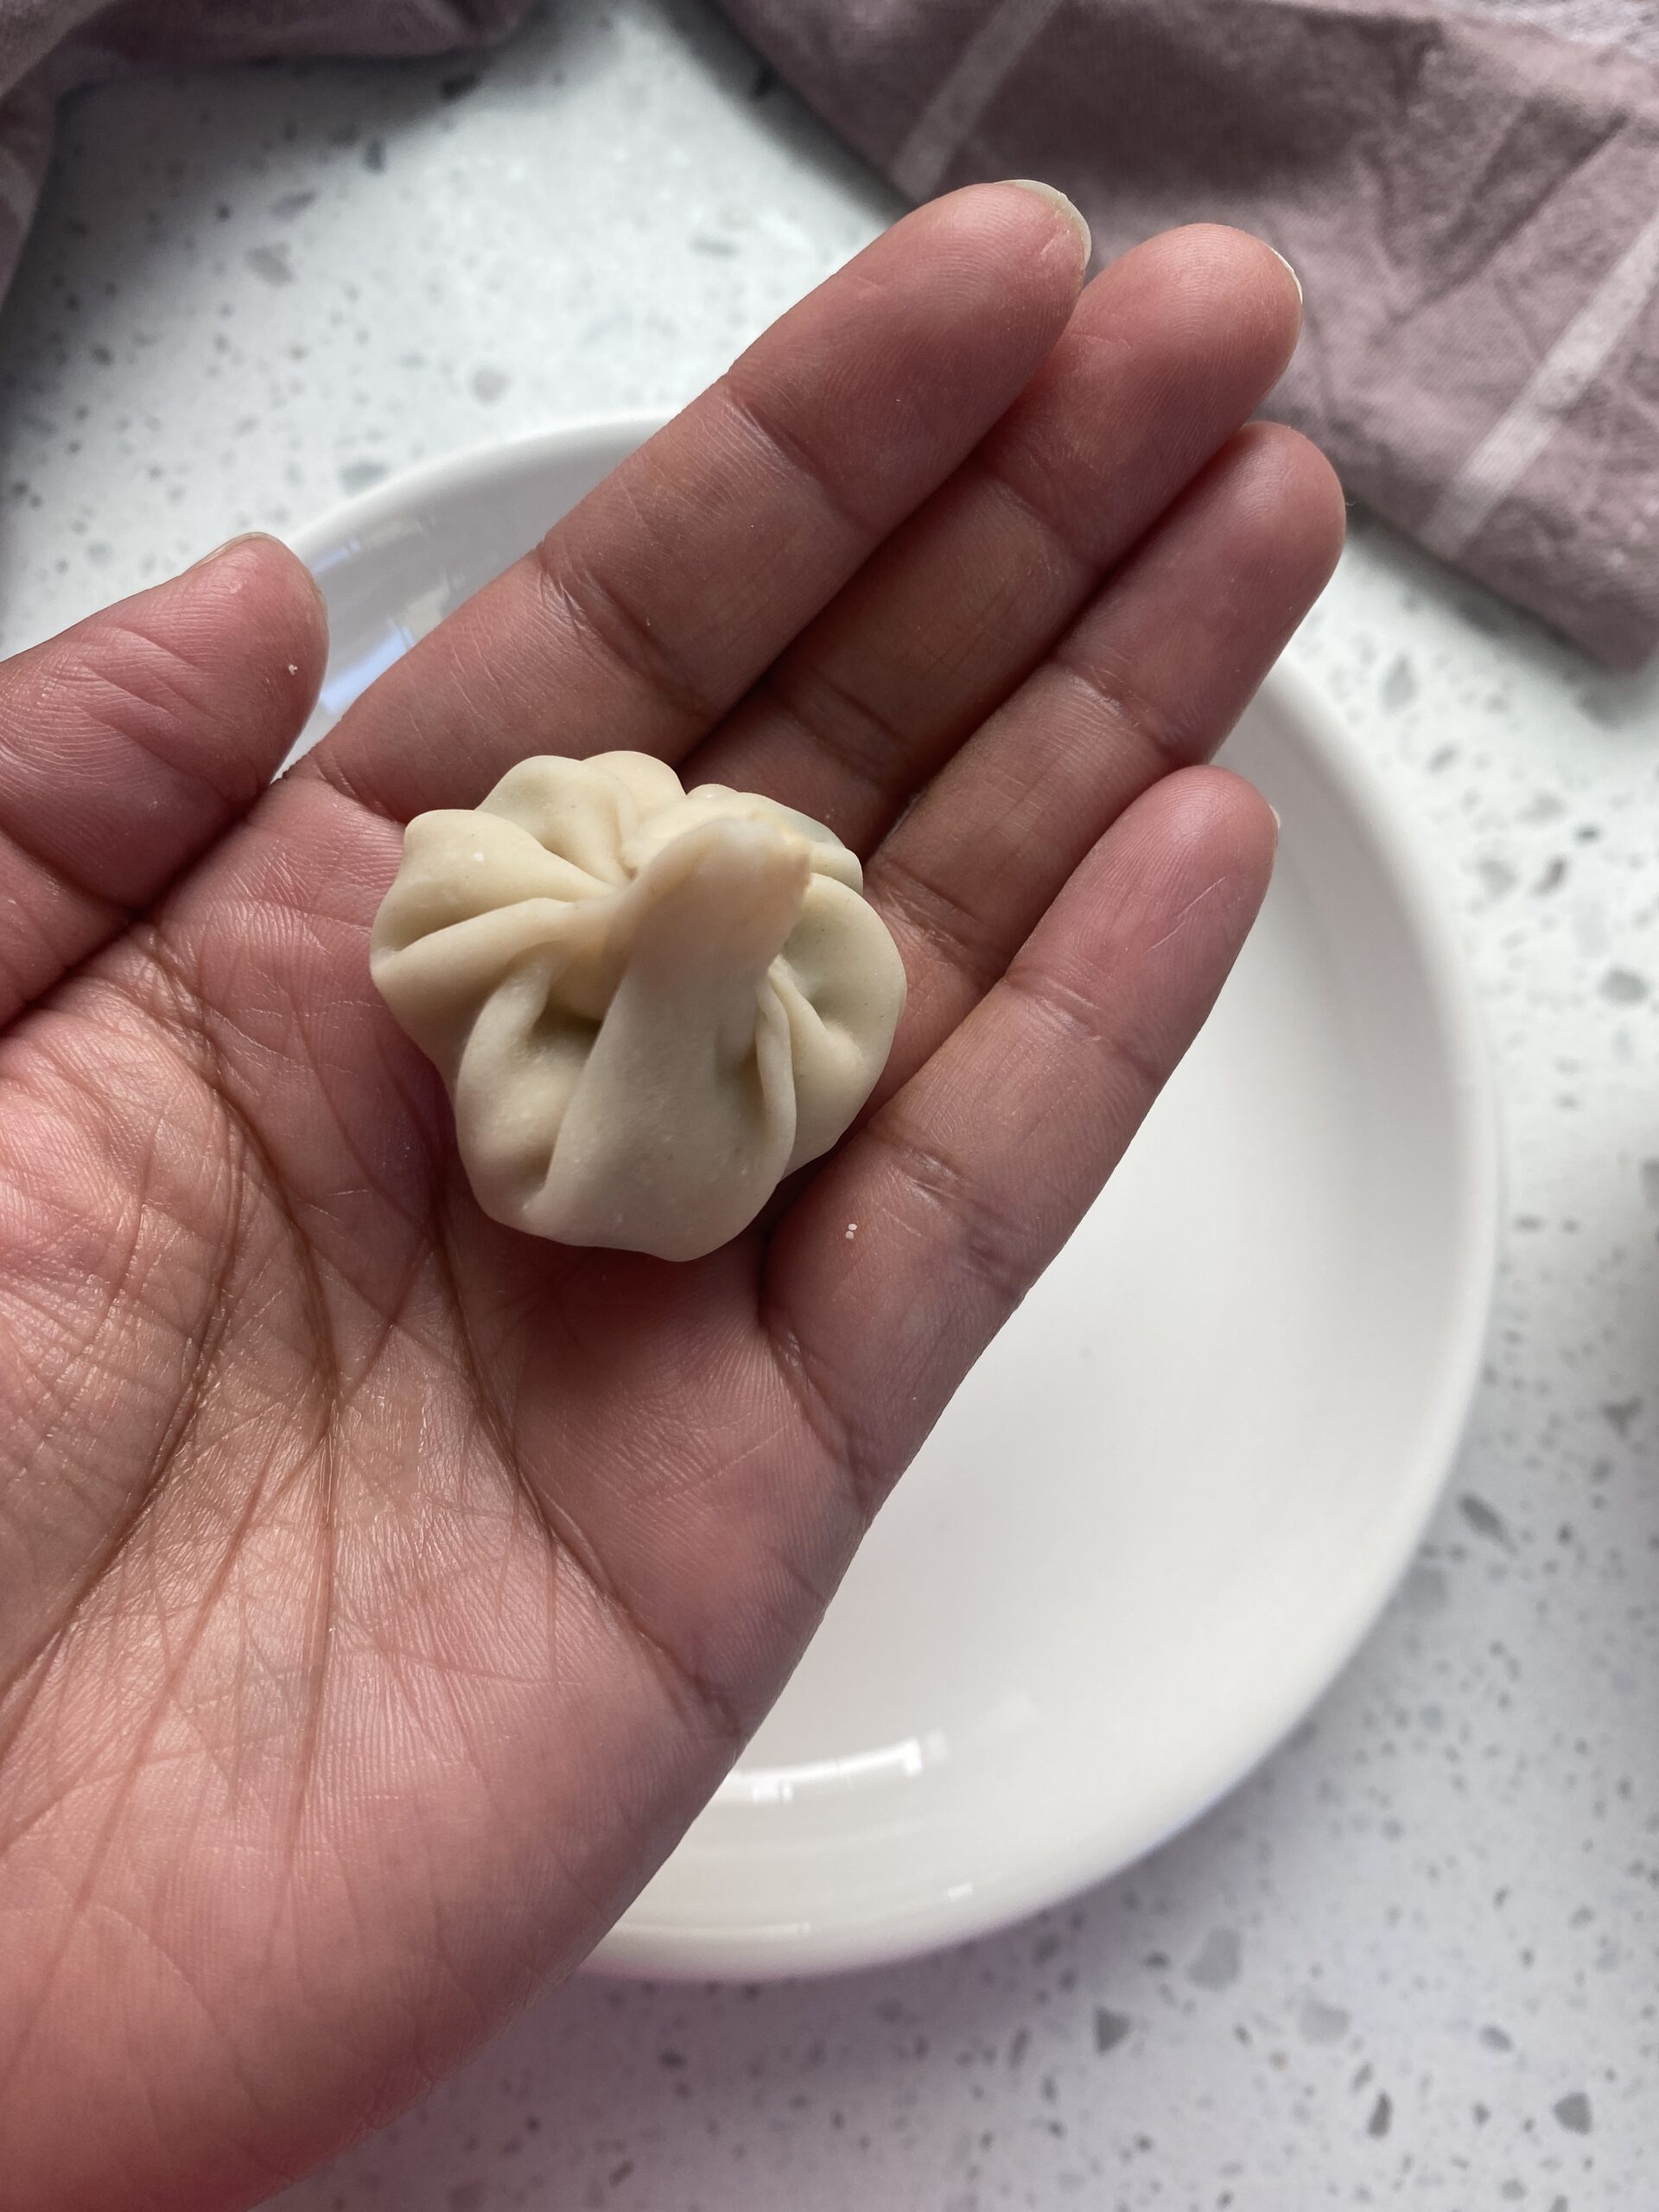 folding dumplings into a momo in a palm of a hand